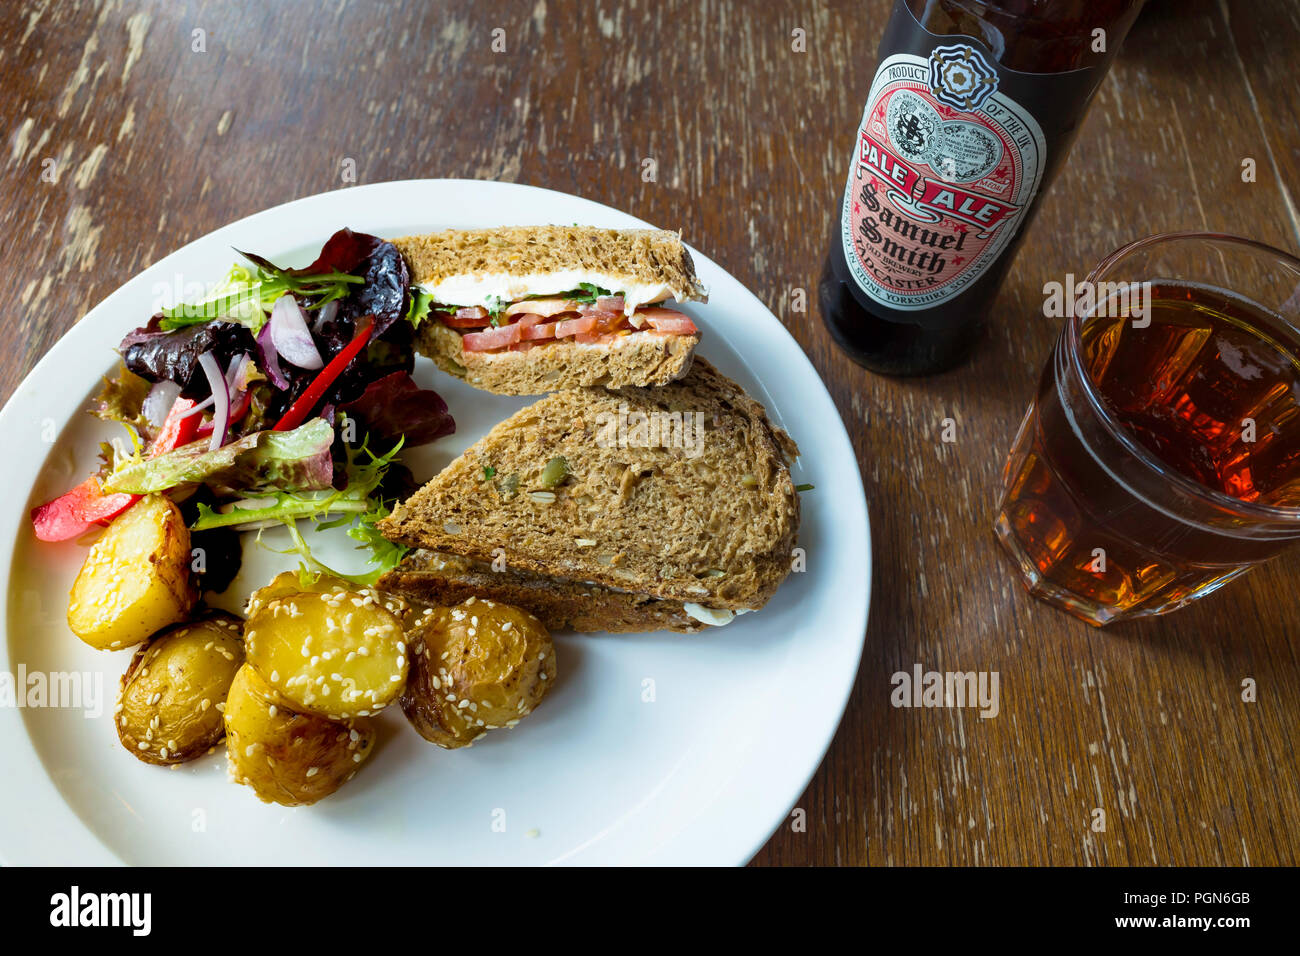 Café lunch a cream cheese and tomato sandwich  on multigrain brown bread with salad sesame potatoes and a glass and bottle of organic Pale Ale Stock Photo